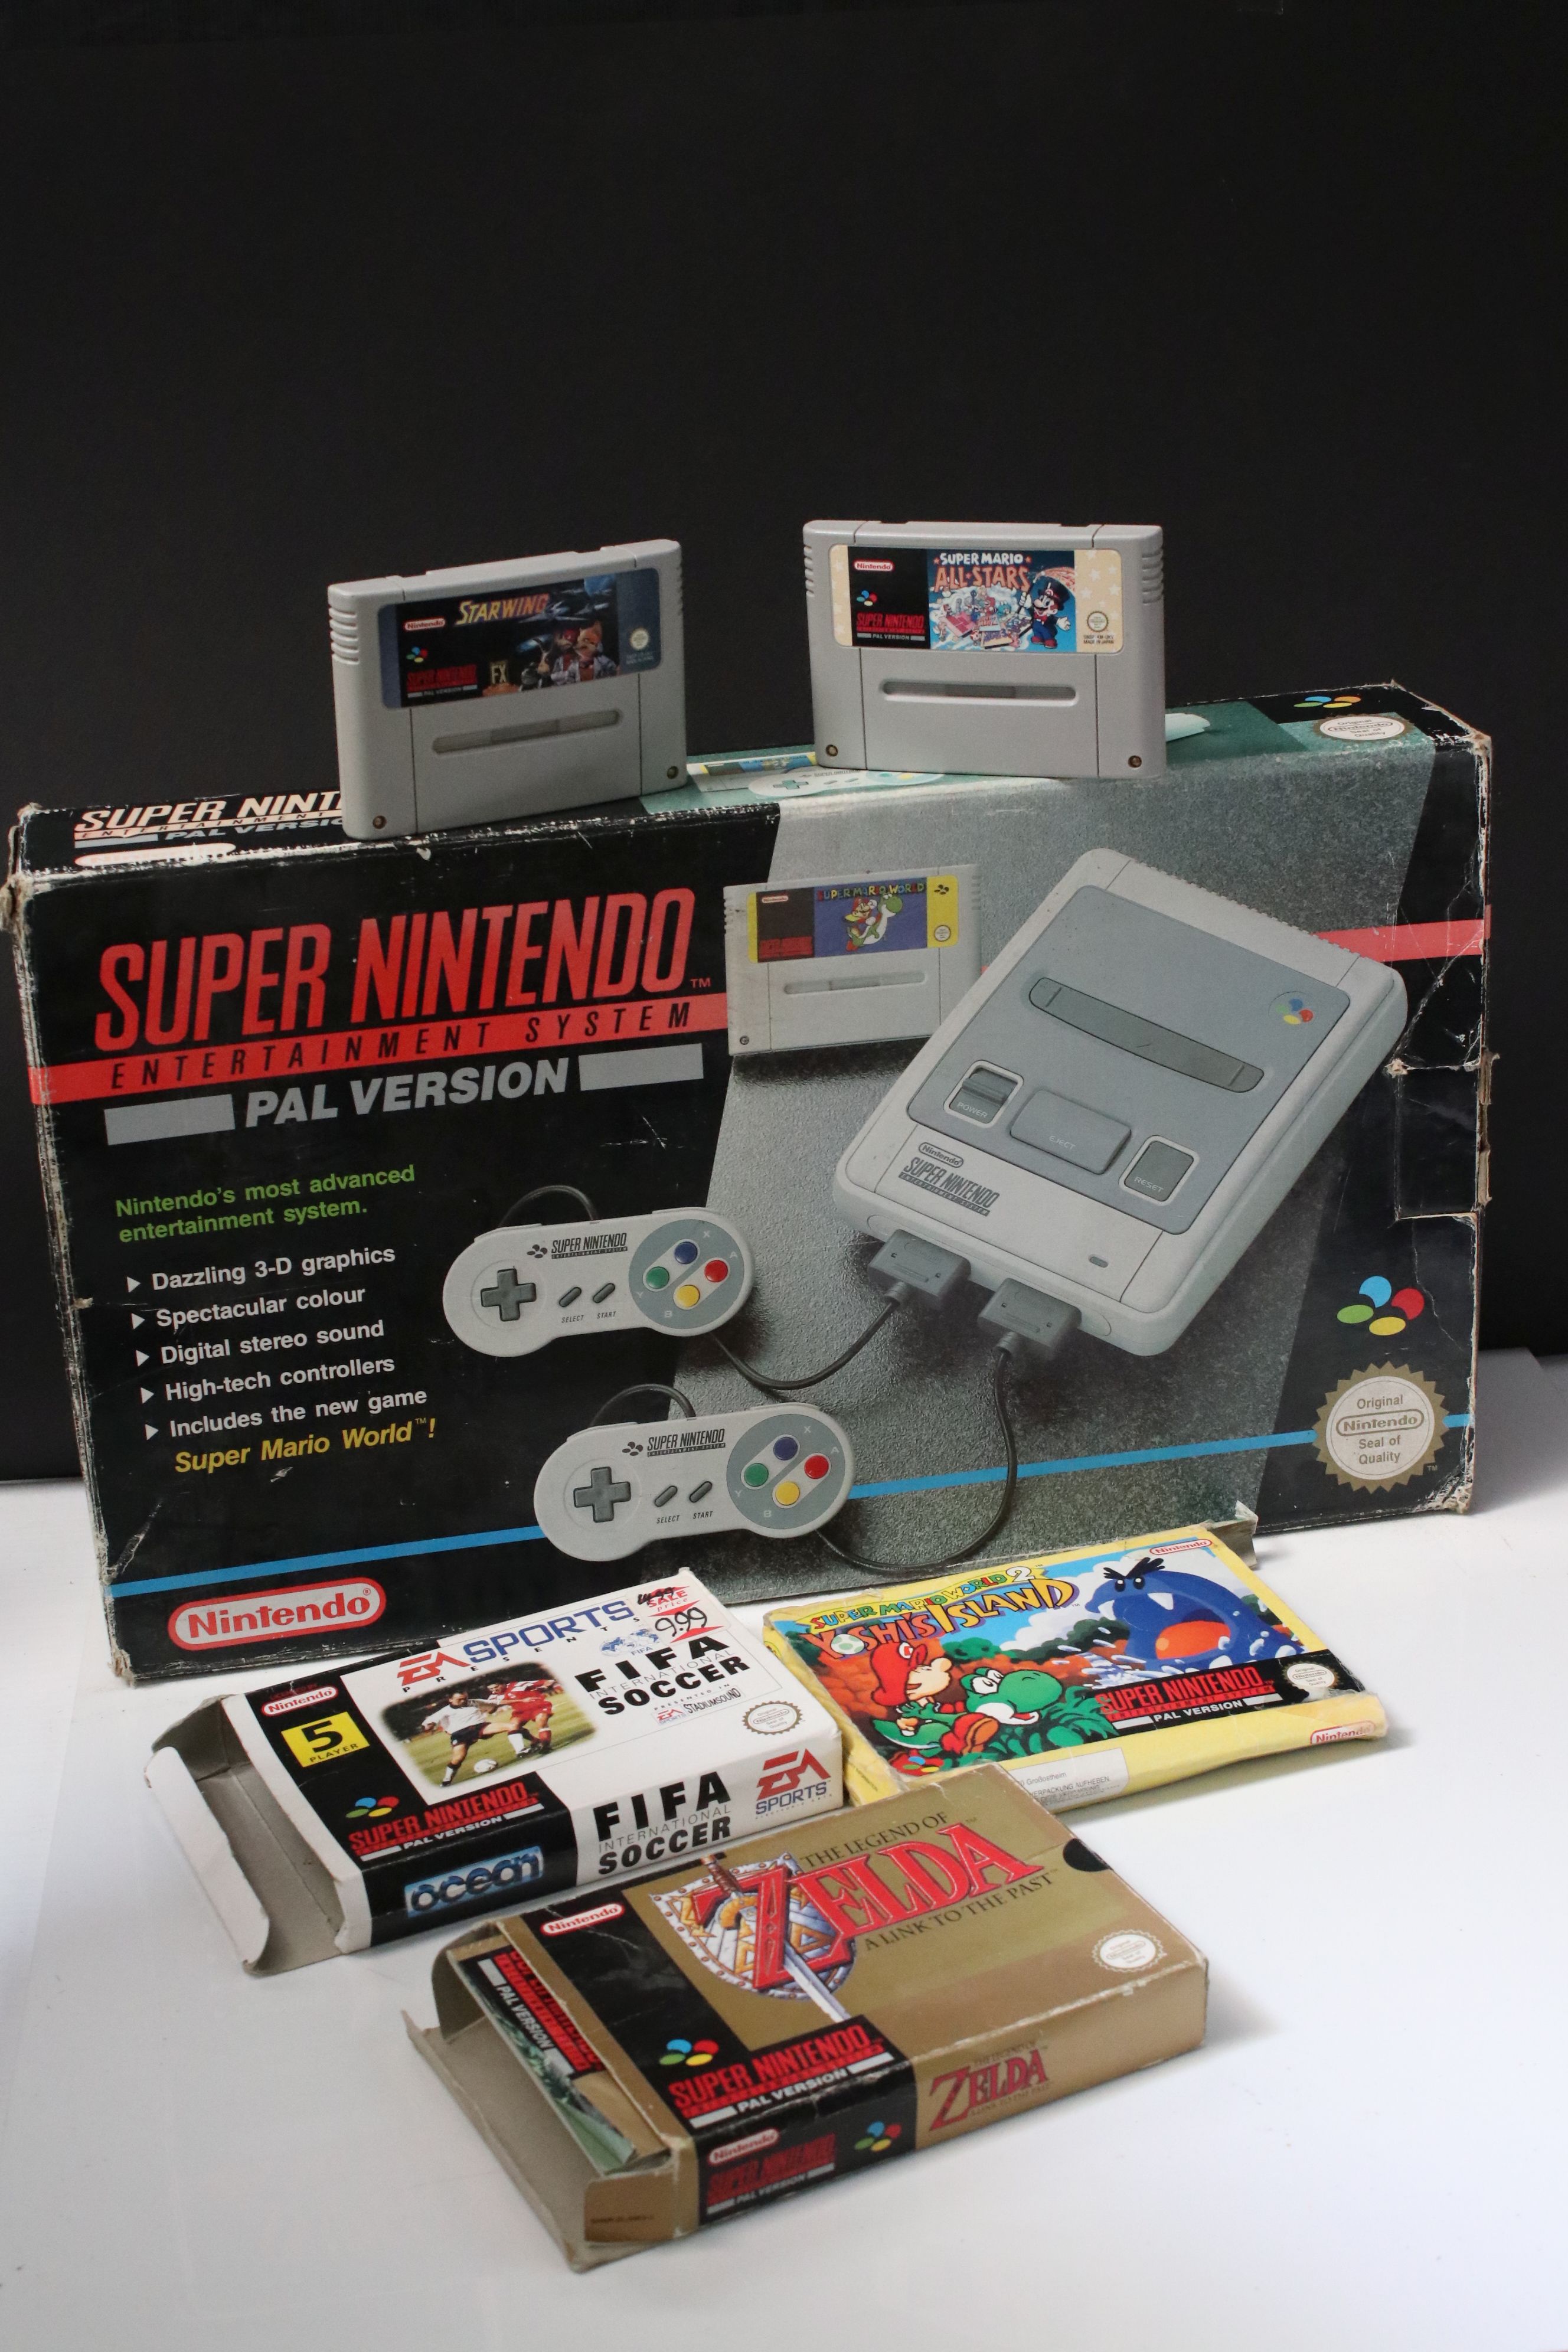 Retro Gaming - Boxed Super Nintendo SNES console with one controller and Super Mario World cartridge